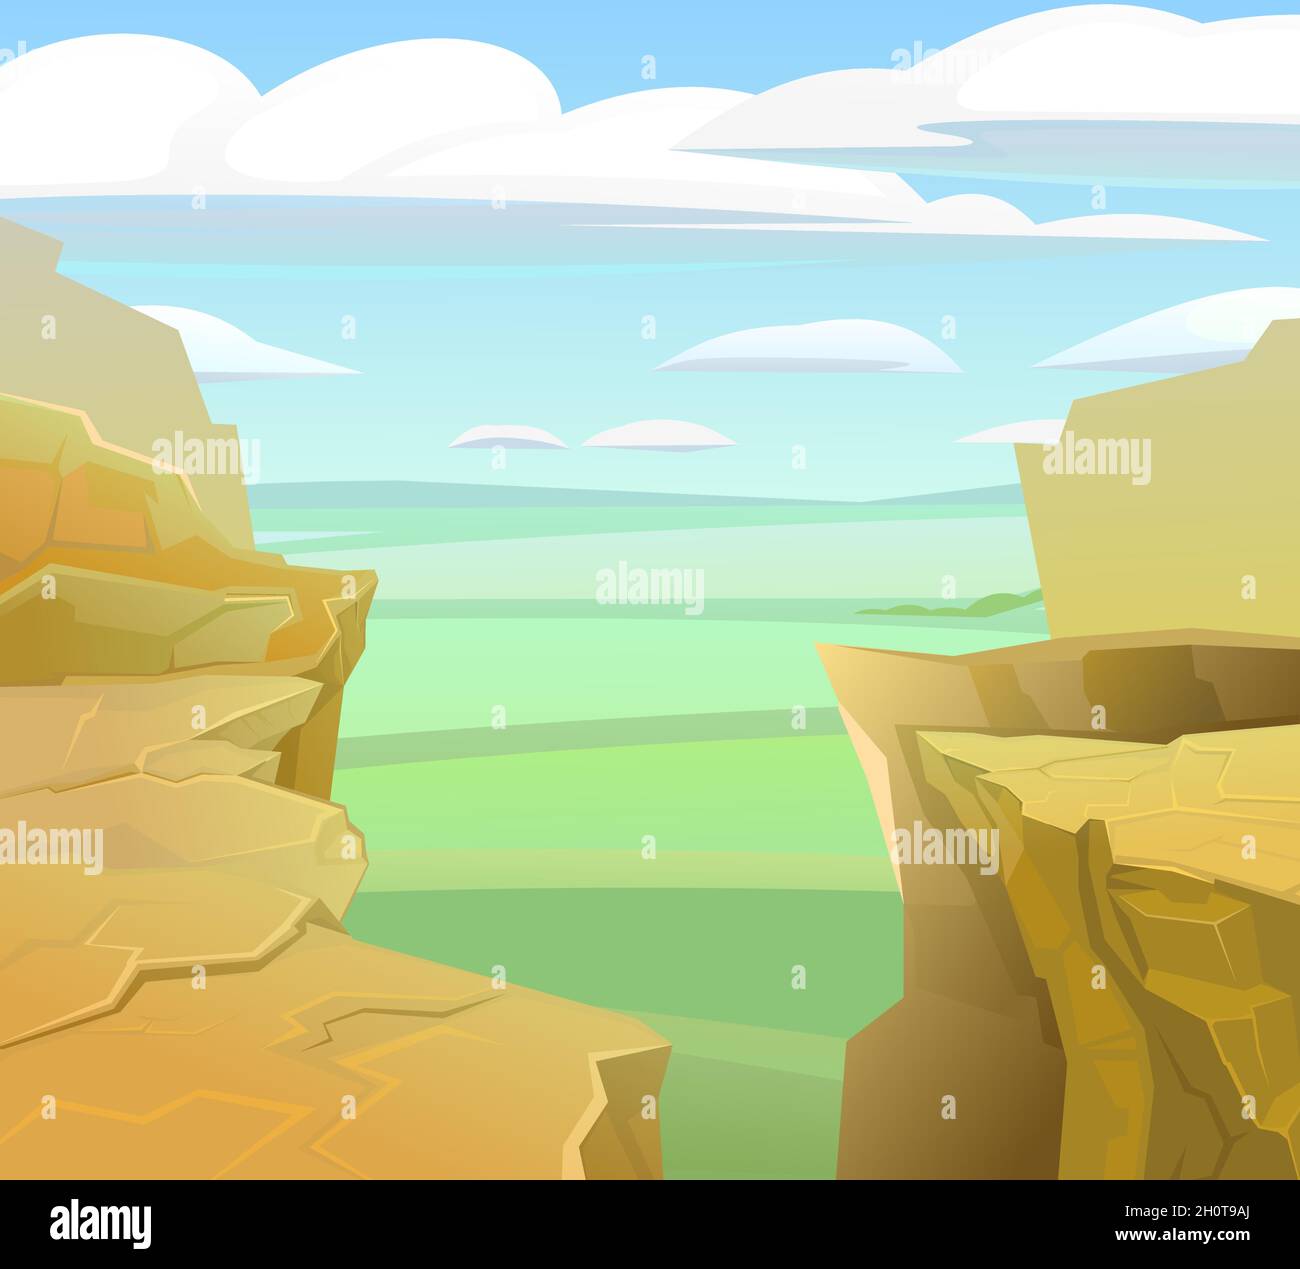 Rocky cliffs. The edges of the cliff. Horizon distance from above. Natural landscape with stones. Illustration in cartoon style flat design. Vector. Stock Vector